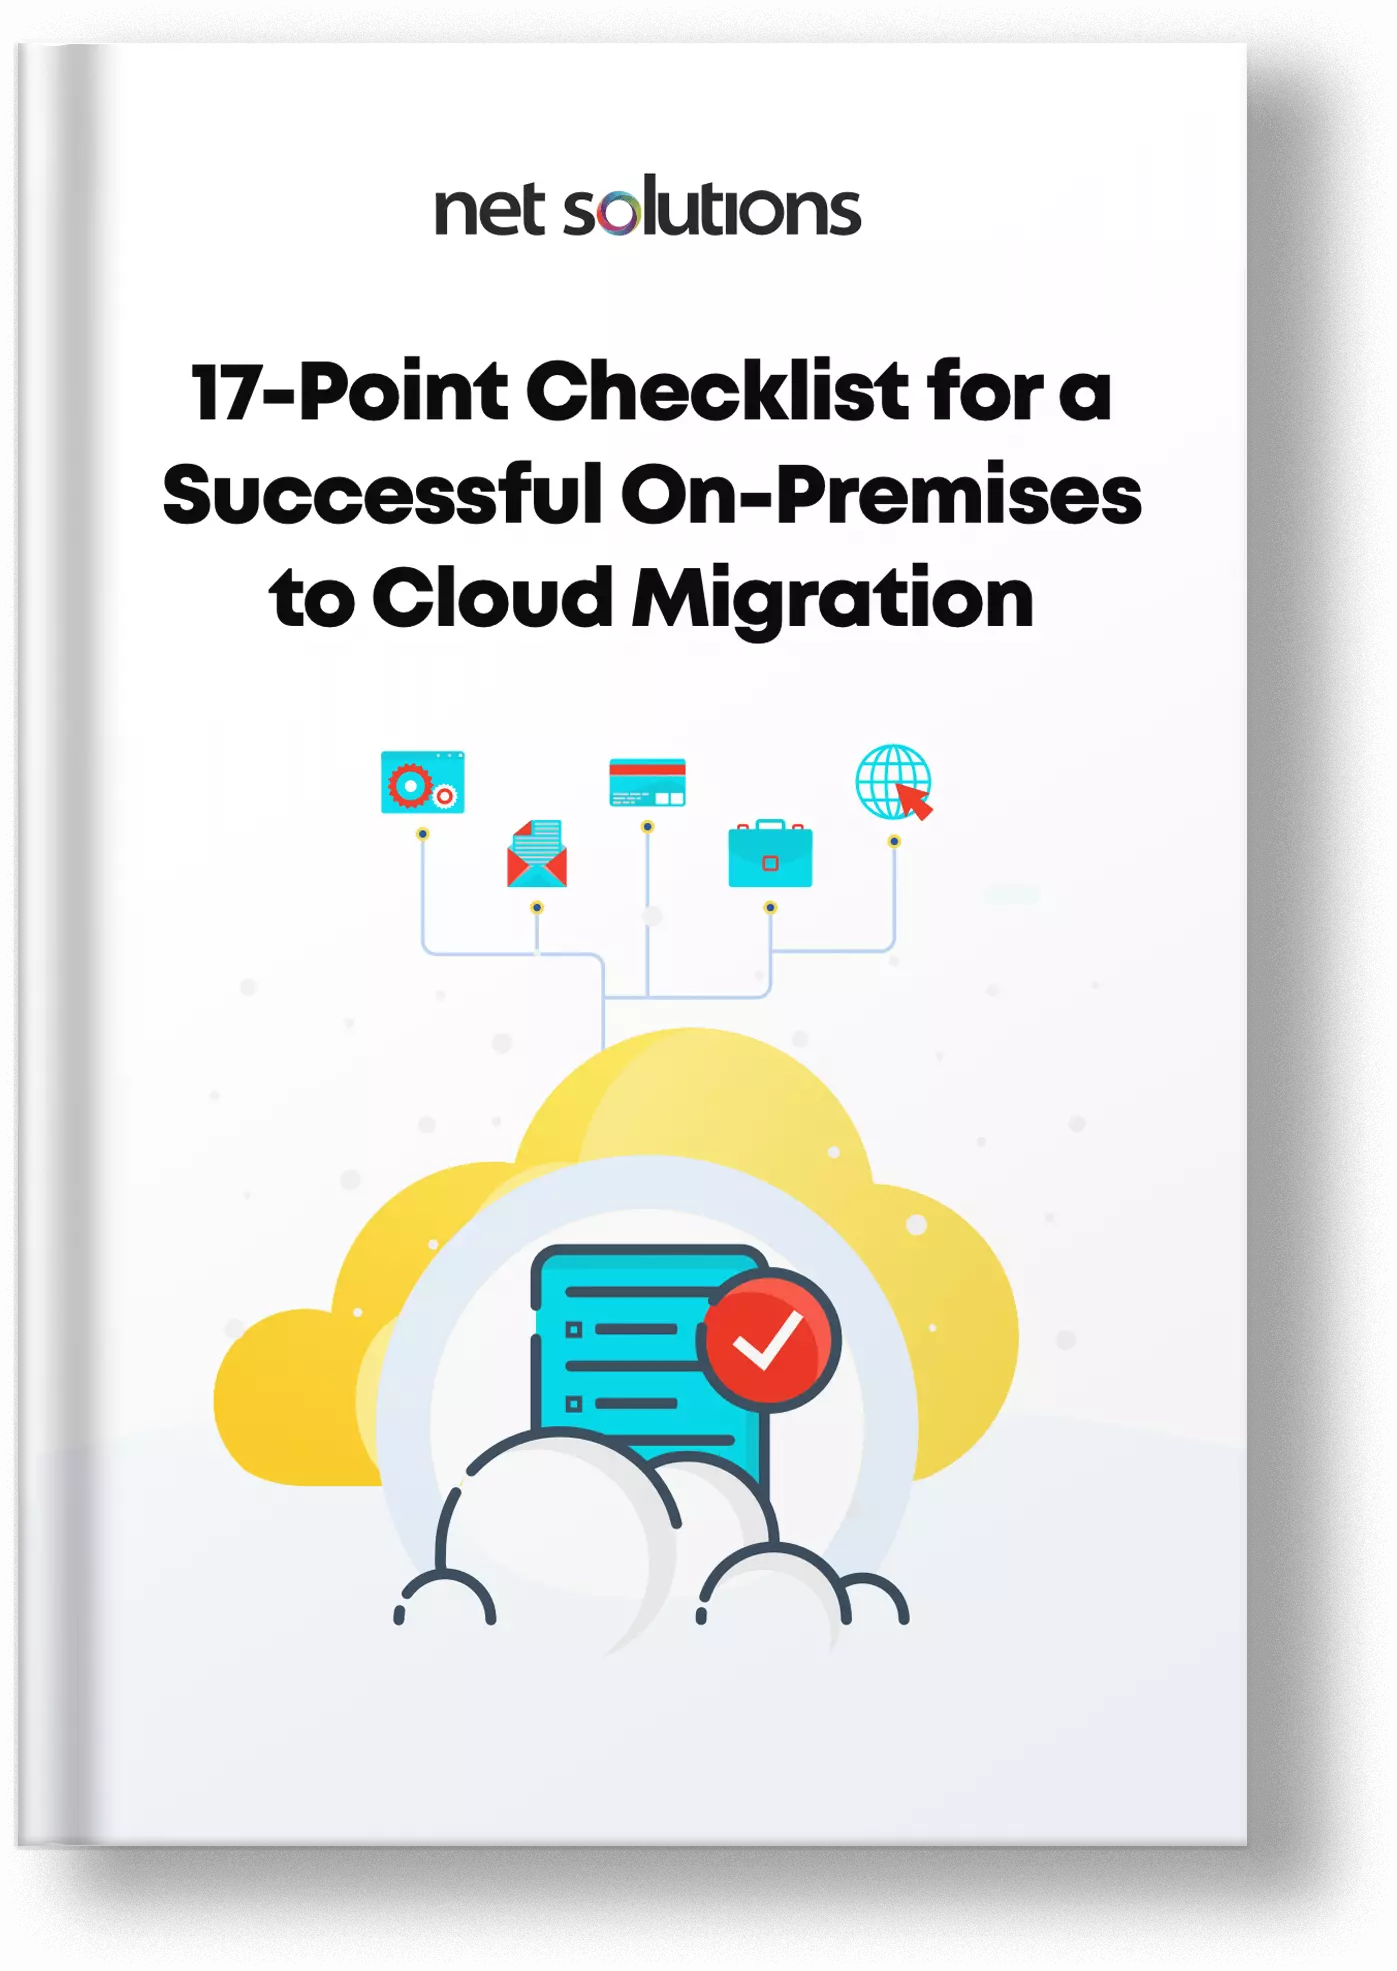 17-Point Checklist for a Successful On-Premises to Cloud Migration